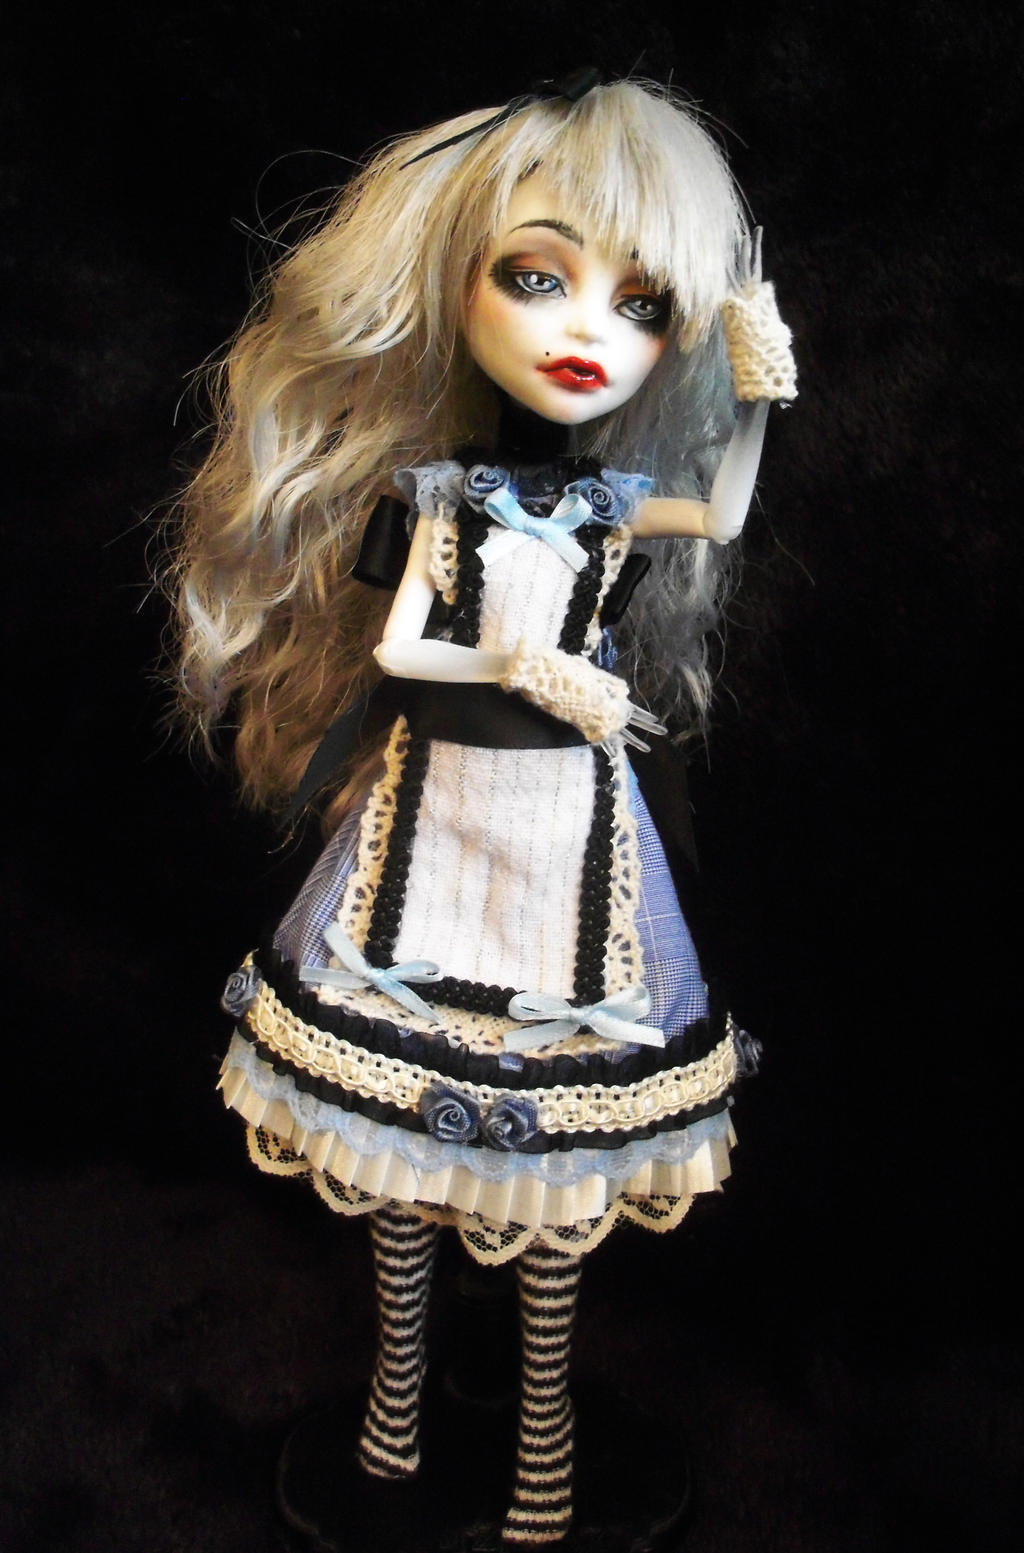 Spectra as Alice